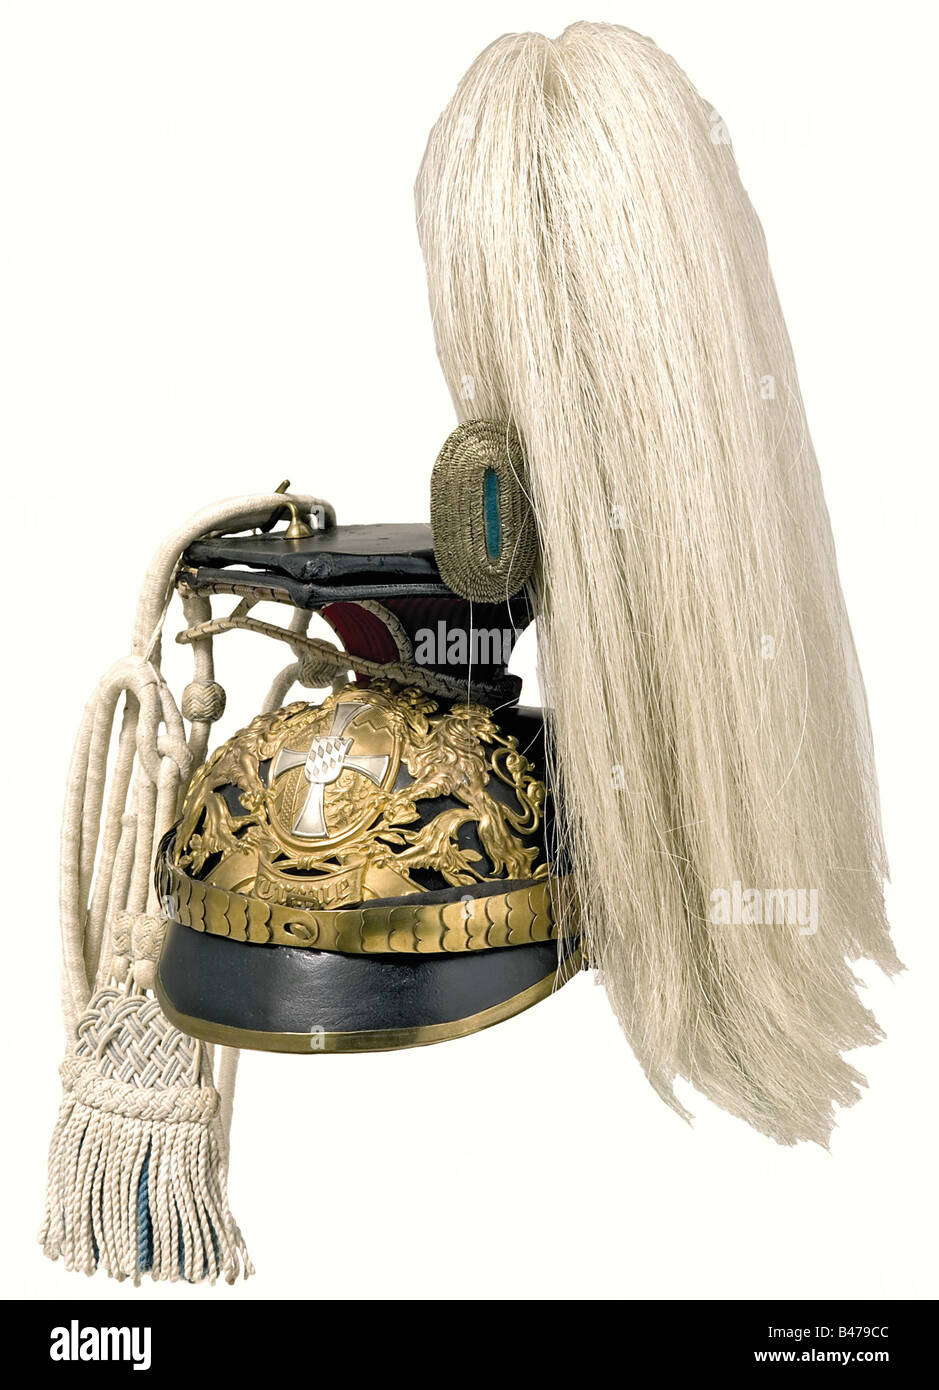 A model 1886 czapka for a reserve Wachtmeister, of the 1st Uhlan Regiment. Leather skull in issue style. Large tombac plate with a nickel-silver reserve cross. Regulation officer field insignia and cockade. Crimson red parade sleeve, white non-commissioned officer's cap lines, white slides with blue interlaces and a white/blue tassel. White horse hair plume with the blue lower part severely bleached. historic, historical, 19th century, Bavaria, Bavarian, German, Germany, Southern Germany, the South of Germany, object, objects, stills, militaria, clipping, cut o, Stock Photo